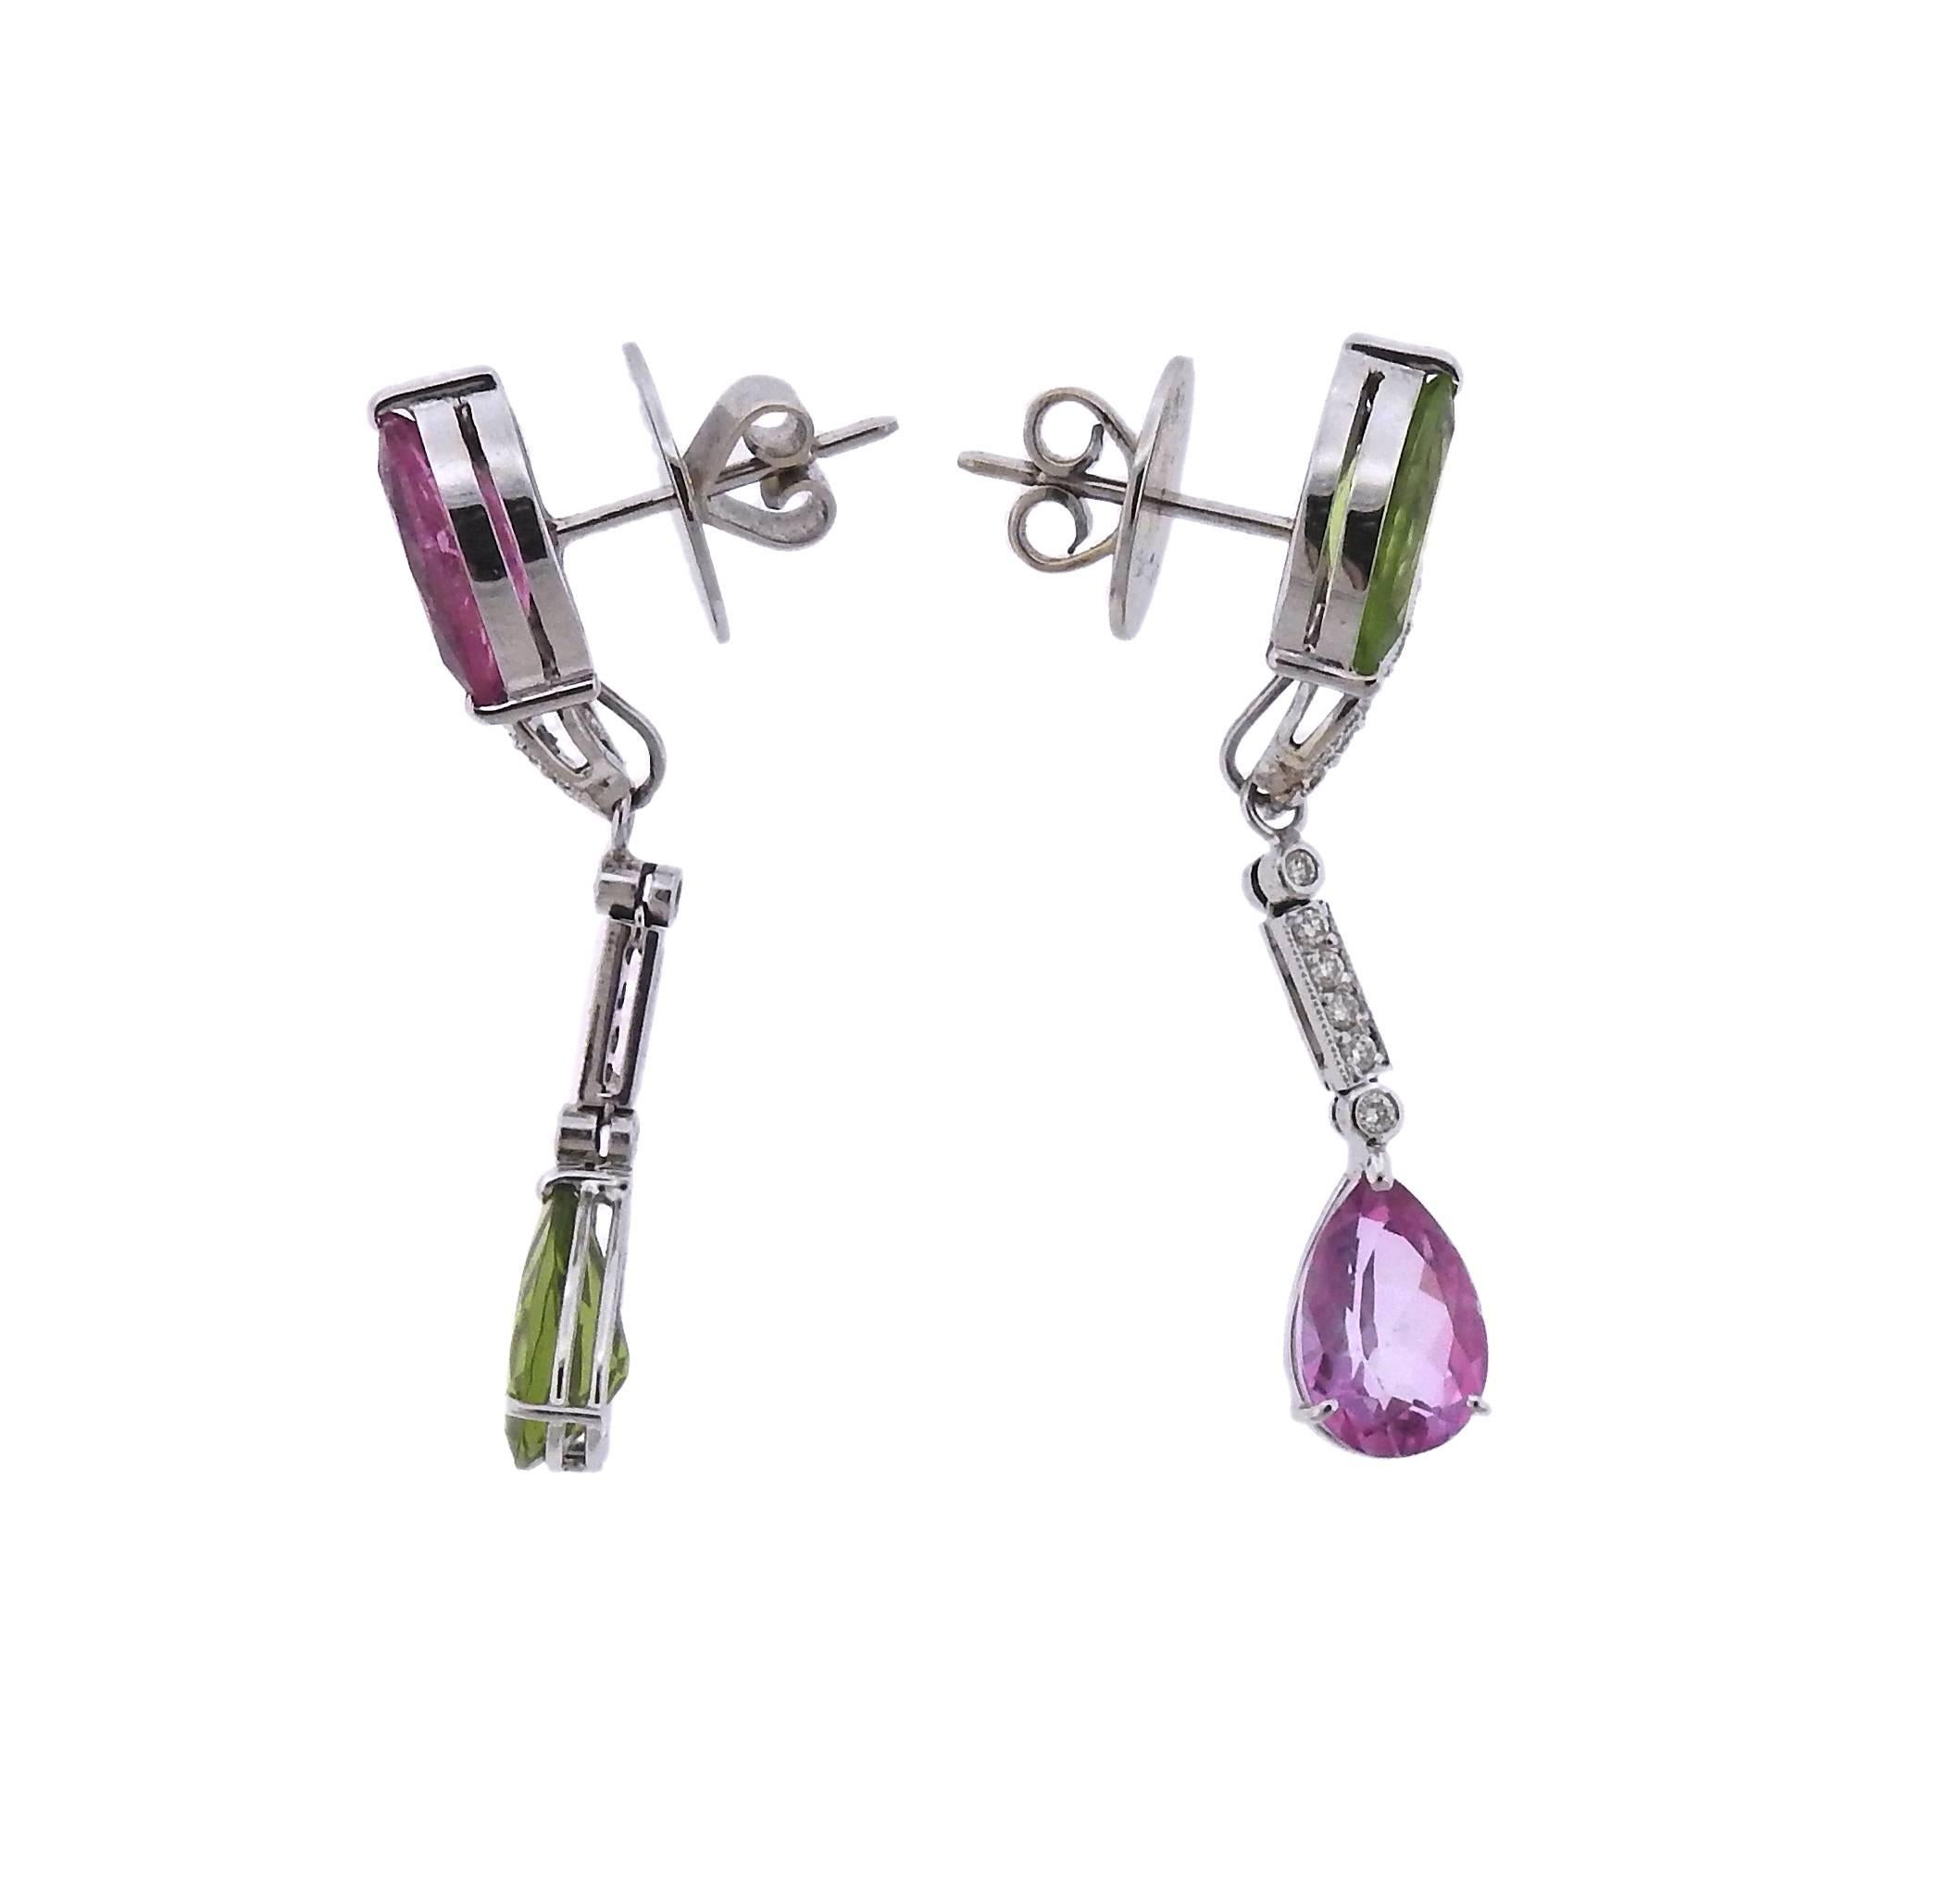 A pair of 14k white gold day & night earrings, set with approximately  0.60ctw,  peridots and pink sapphires.  Come with removable interchangeable drops. Earrings are 47mm long with drops attached, and 20mm without.  Marked 585. Weight - 14.9